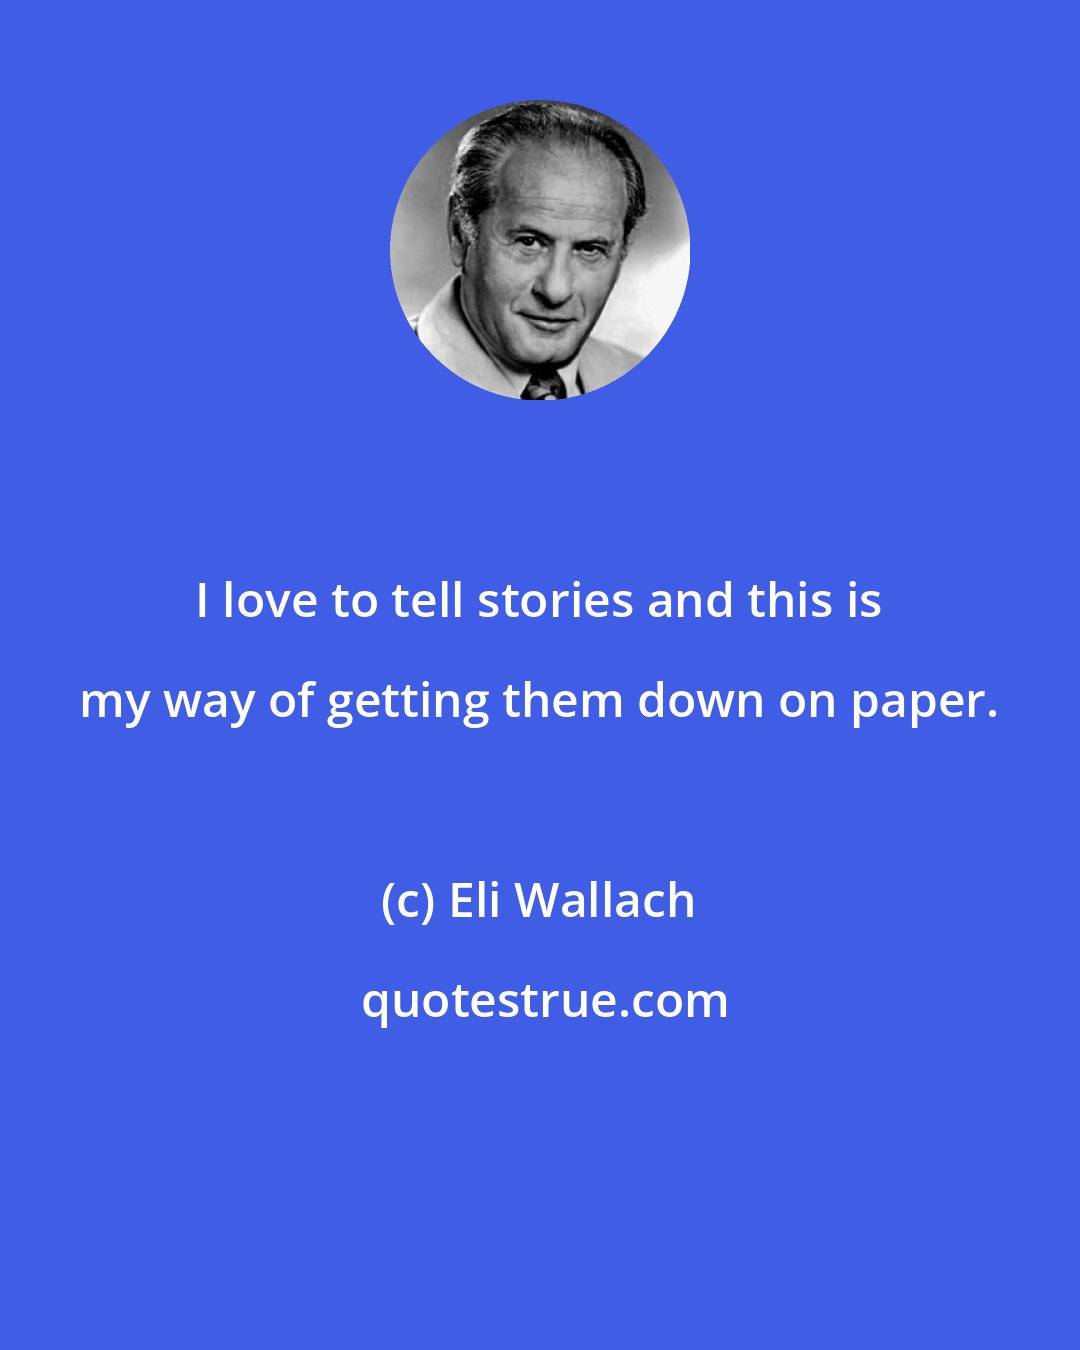 Eli Wallach: I love to tell stories and this is my way of getting them down on paper.